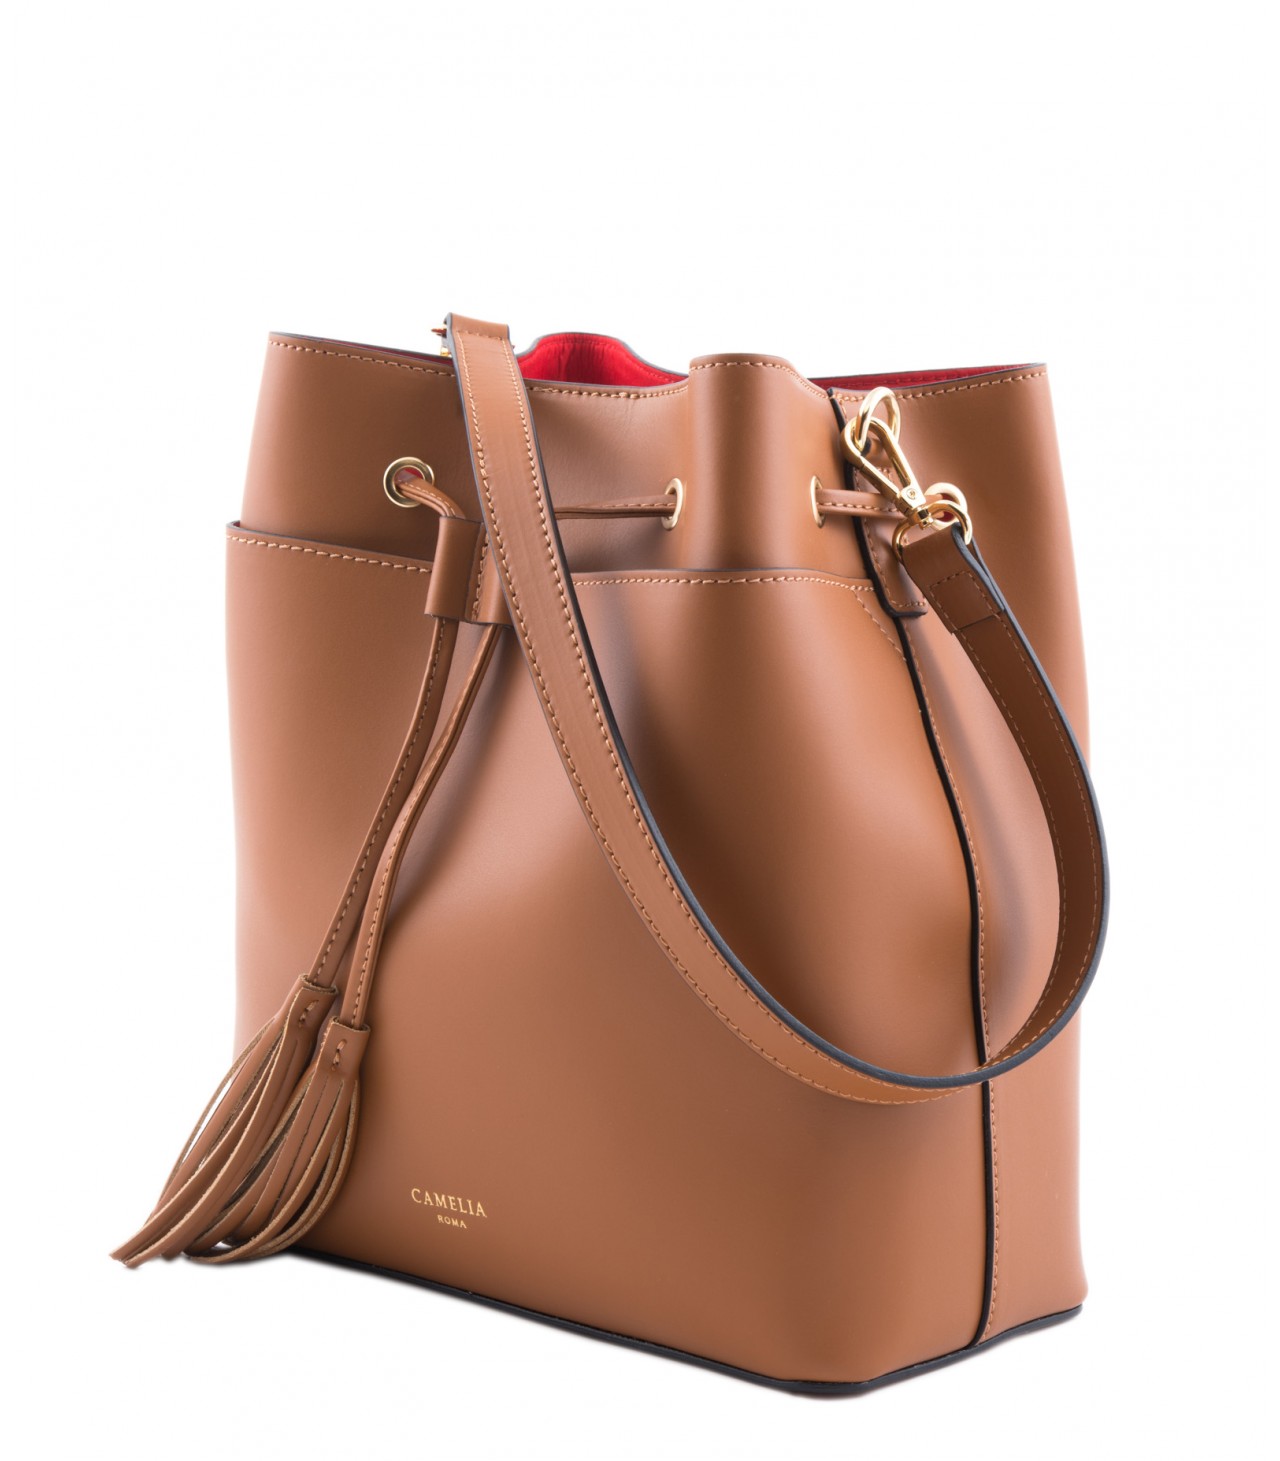 Bucket bag in leather